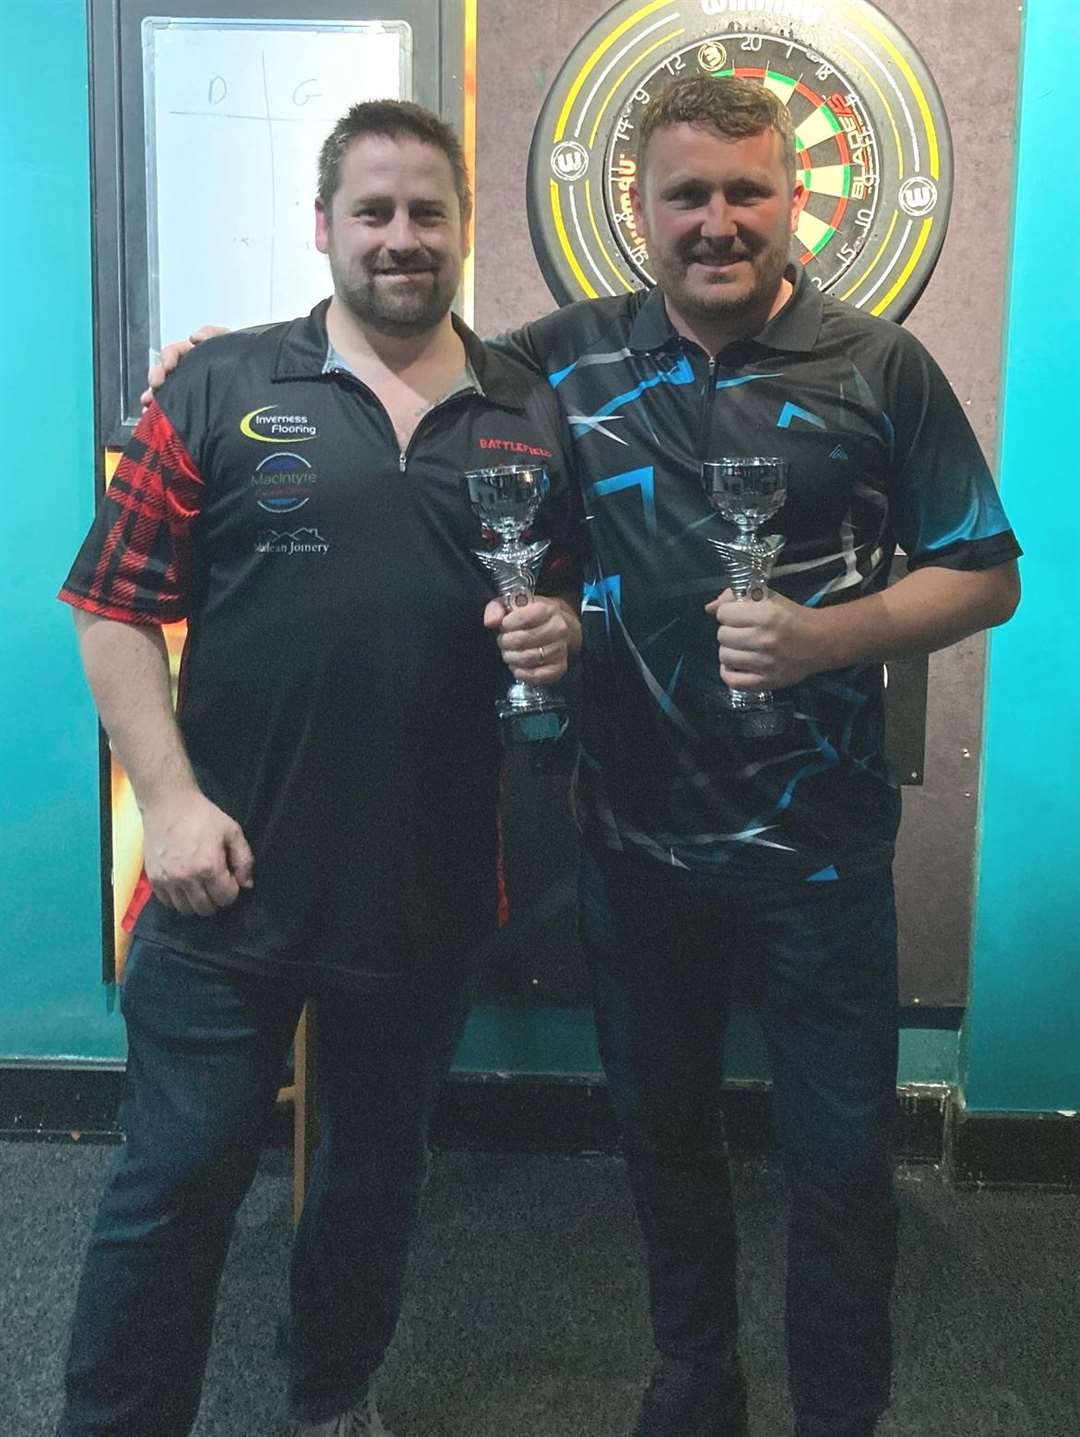 Derek Maclean and Nicky Denoon celebrate winning the A League Pairs.